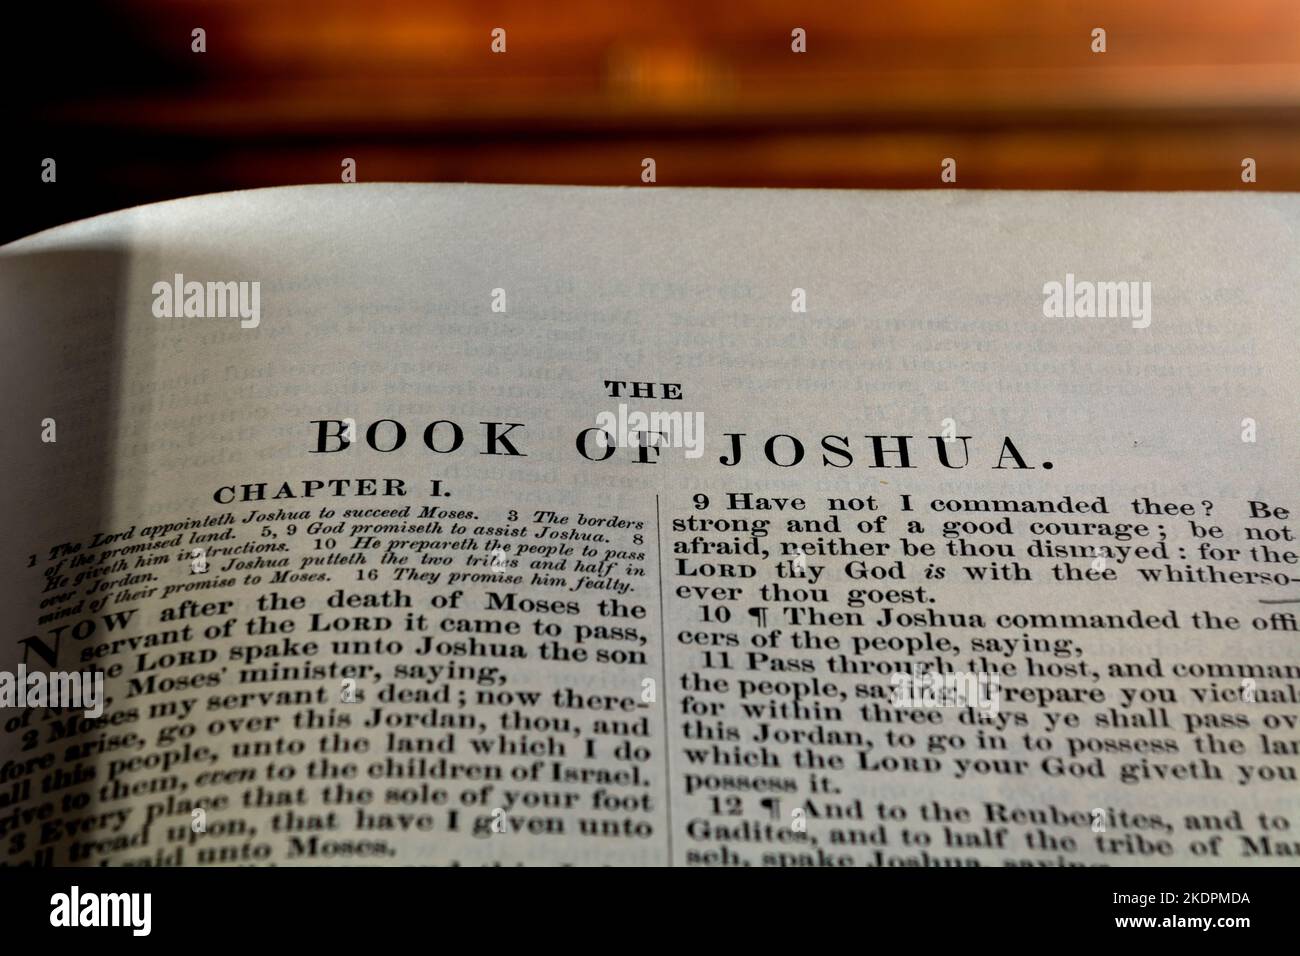 The Book of Joshua in the Bible. Stock Photo